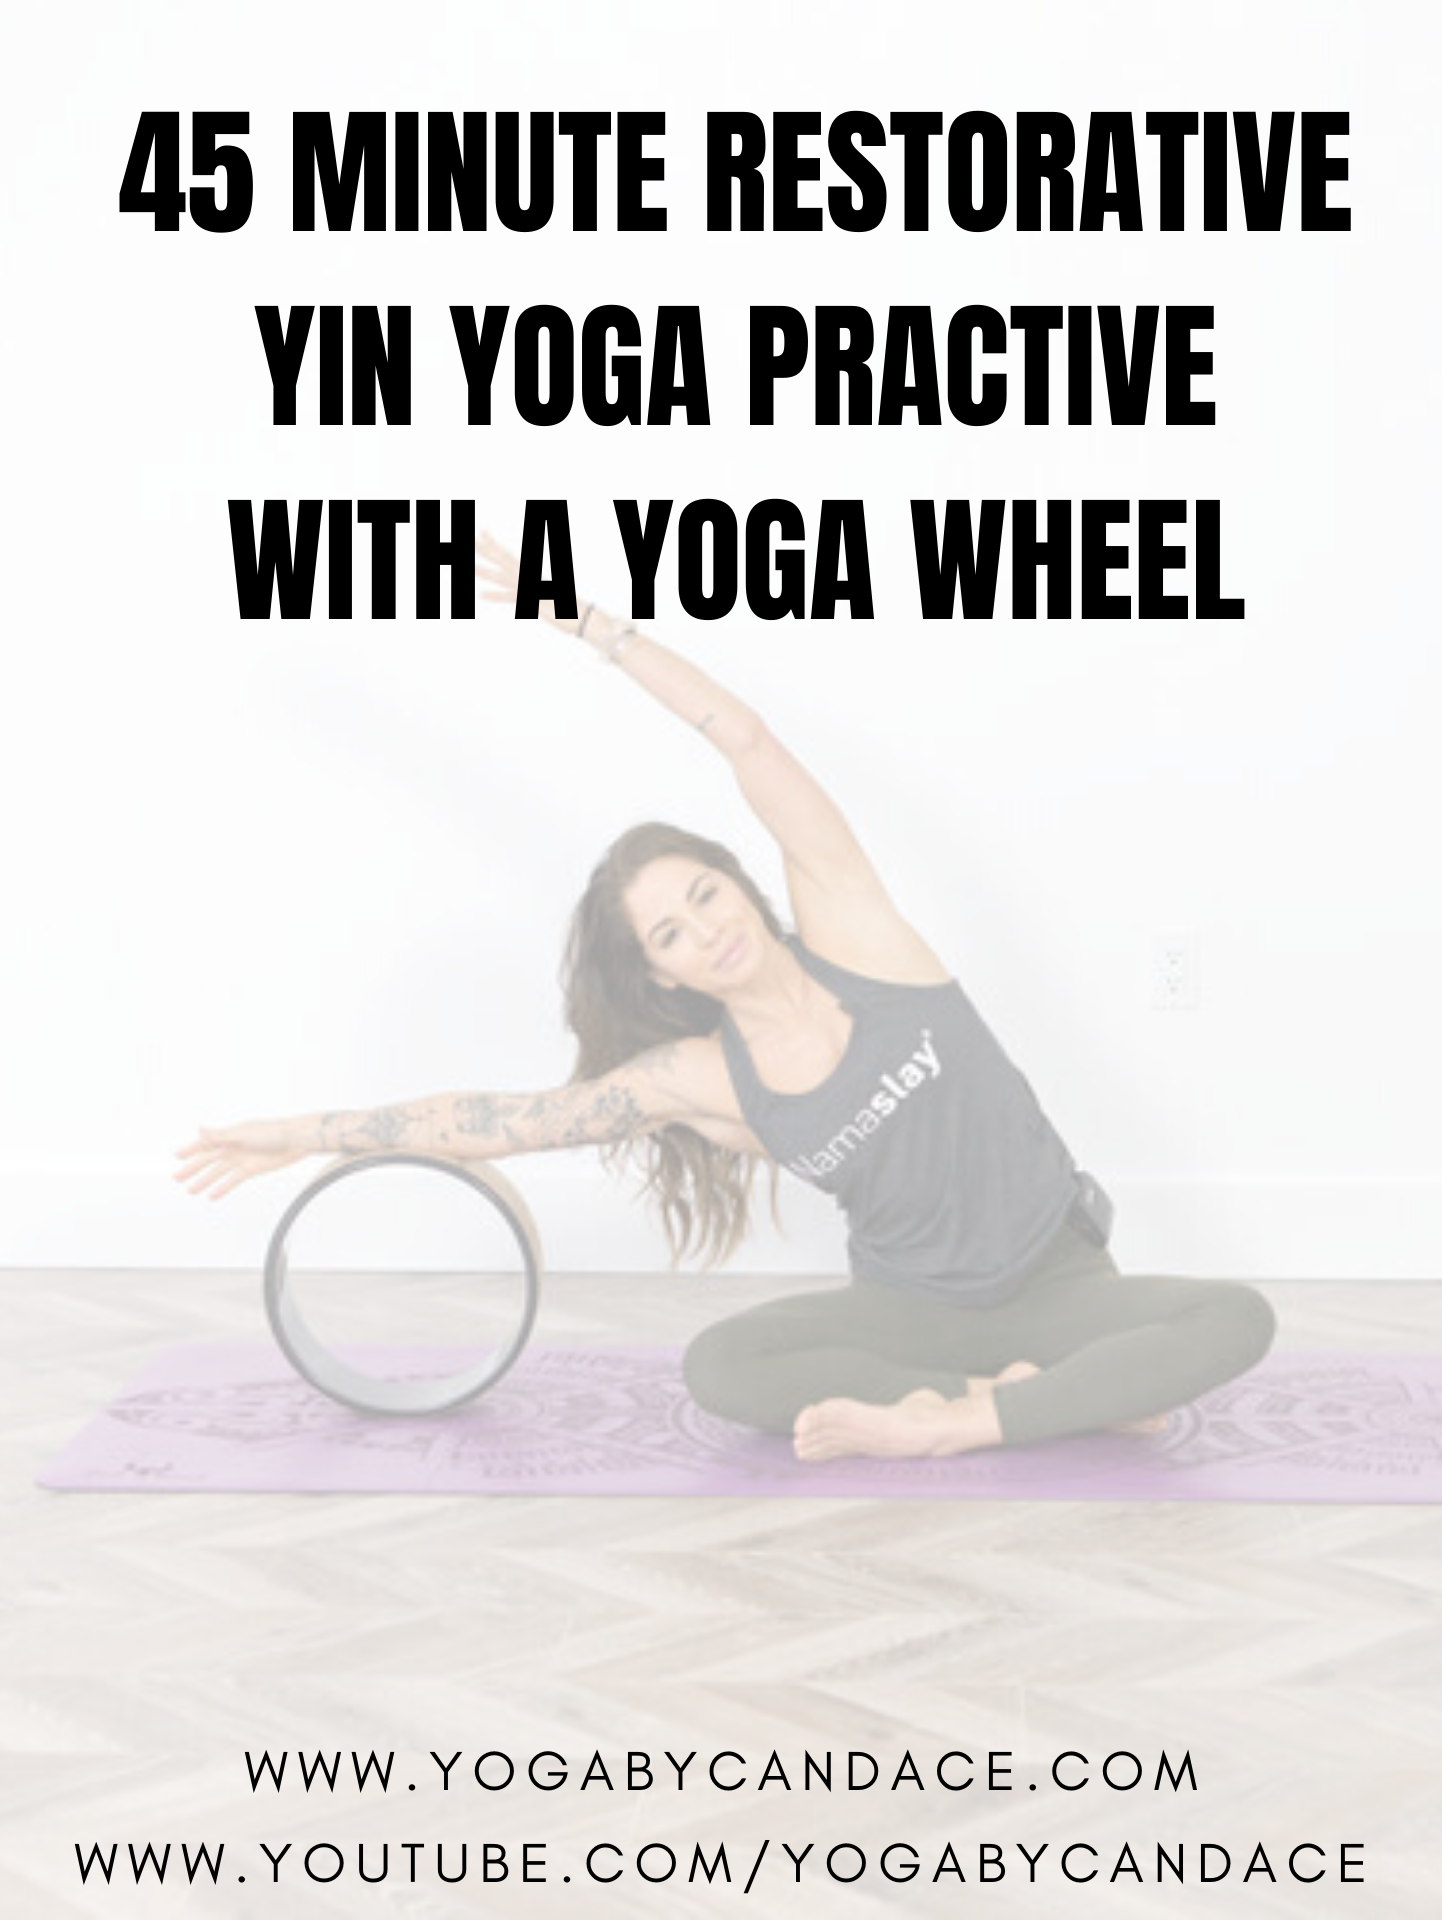 Restore with this Creative Yin Yoga Practice with a Yoga Wheel ...